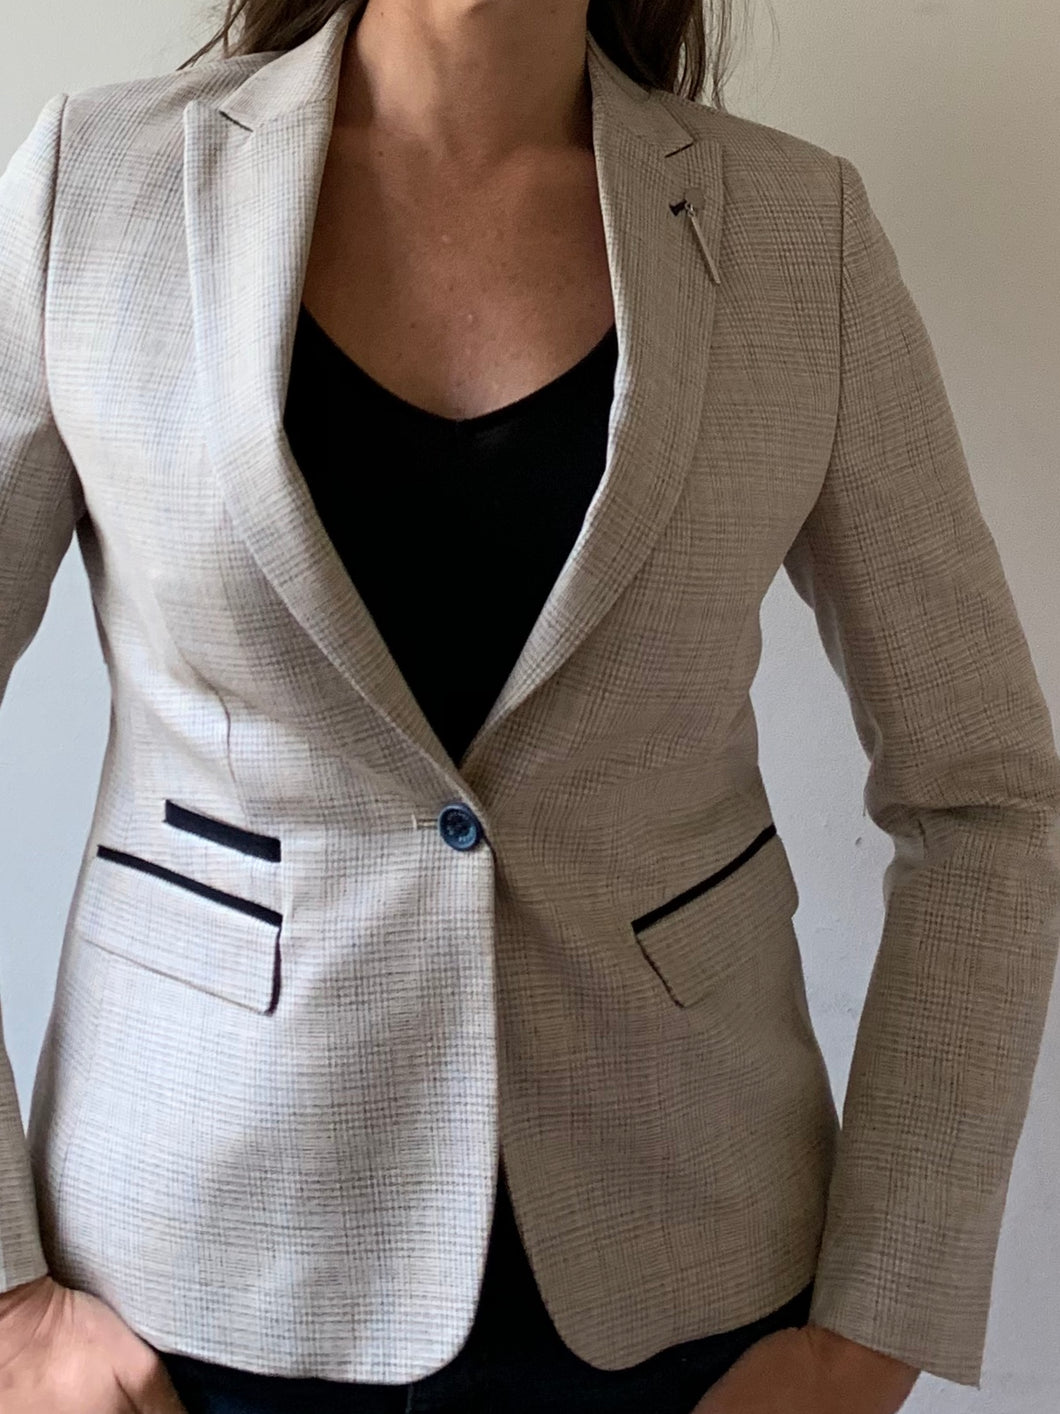 Ladies Caridi Check Blazer. Great fitted jacket for women to dress up for smart or business attire